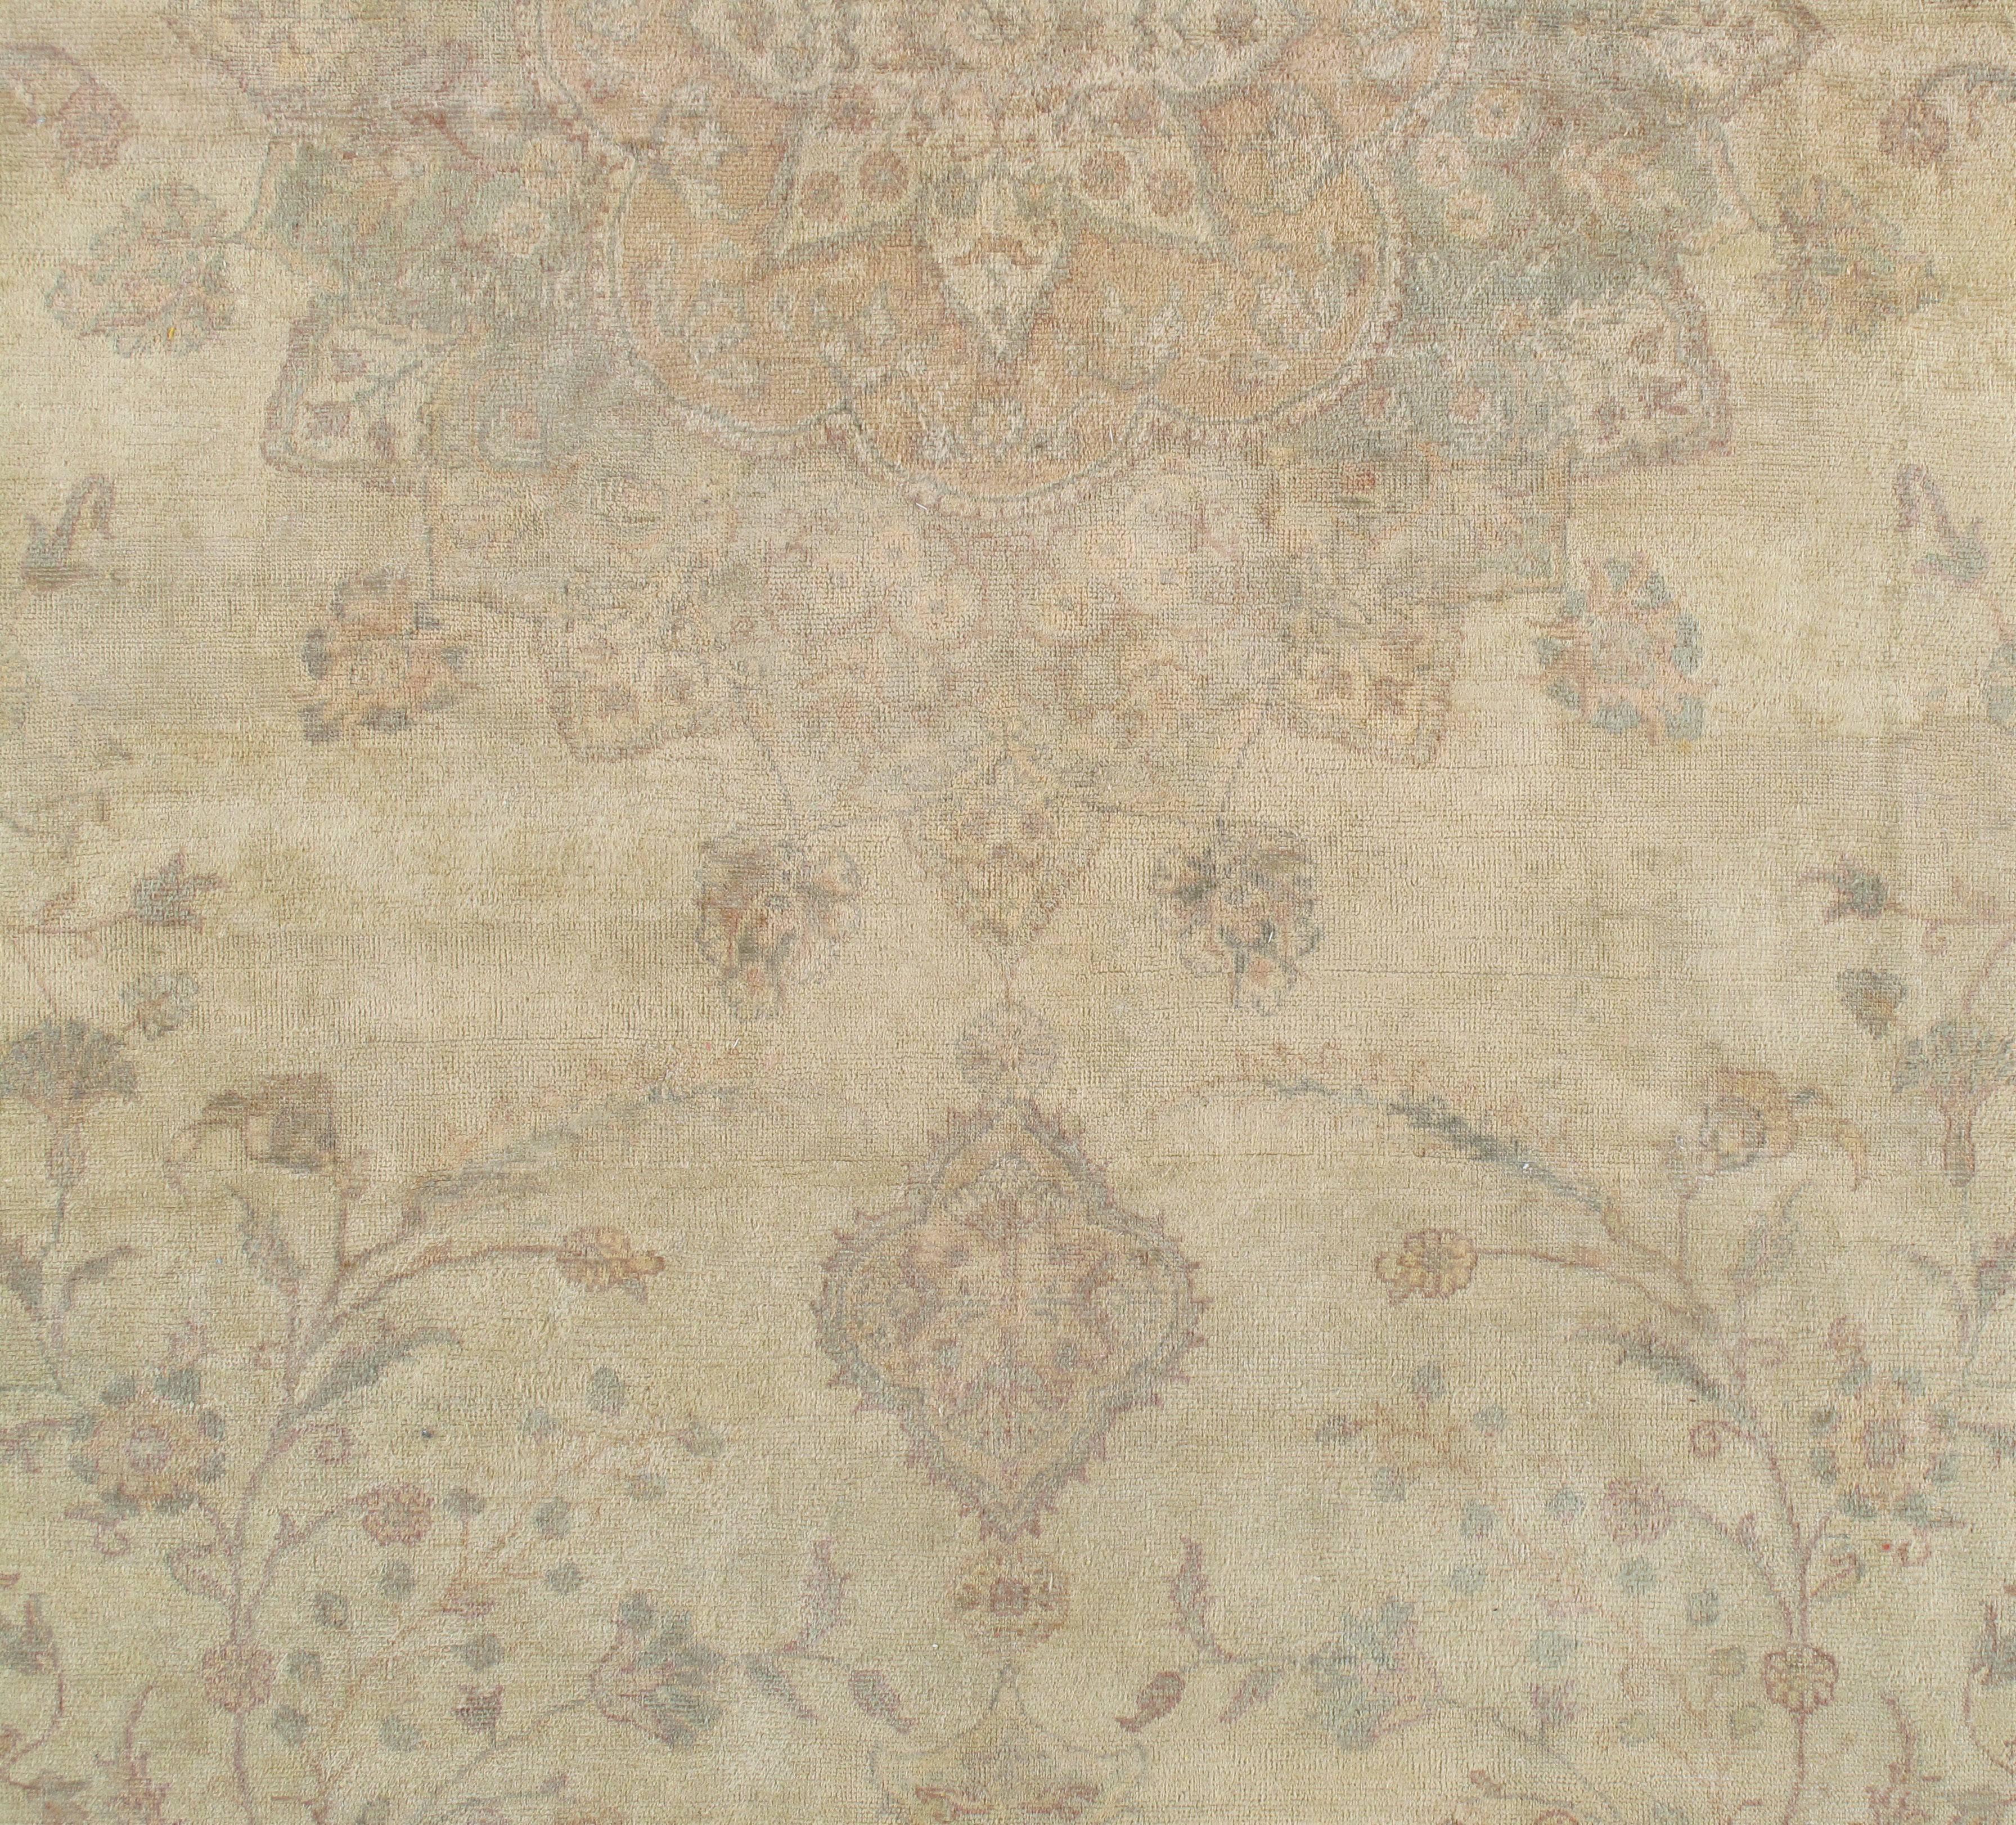 West Anatolia is one of the largest weaving regions in Turkey. Since the 15th Century, Turkish rugs have always been on top of the list for having fine oriental rugs. 
Oushak rugs such as this, are desirable in today’s highly decorative market. A